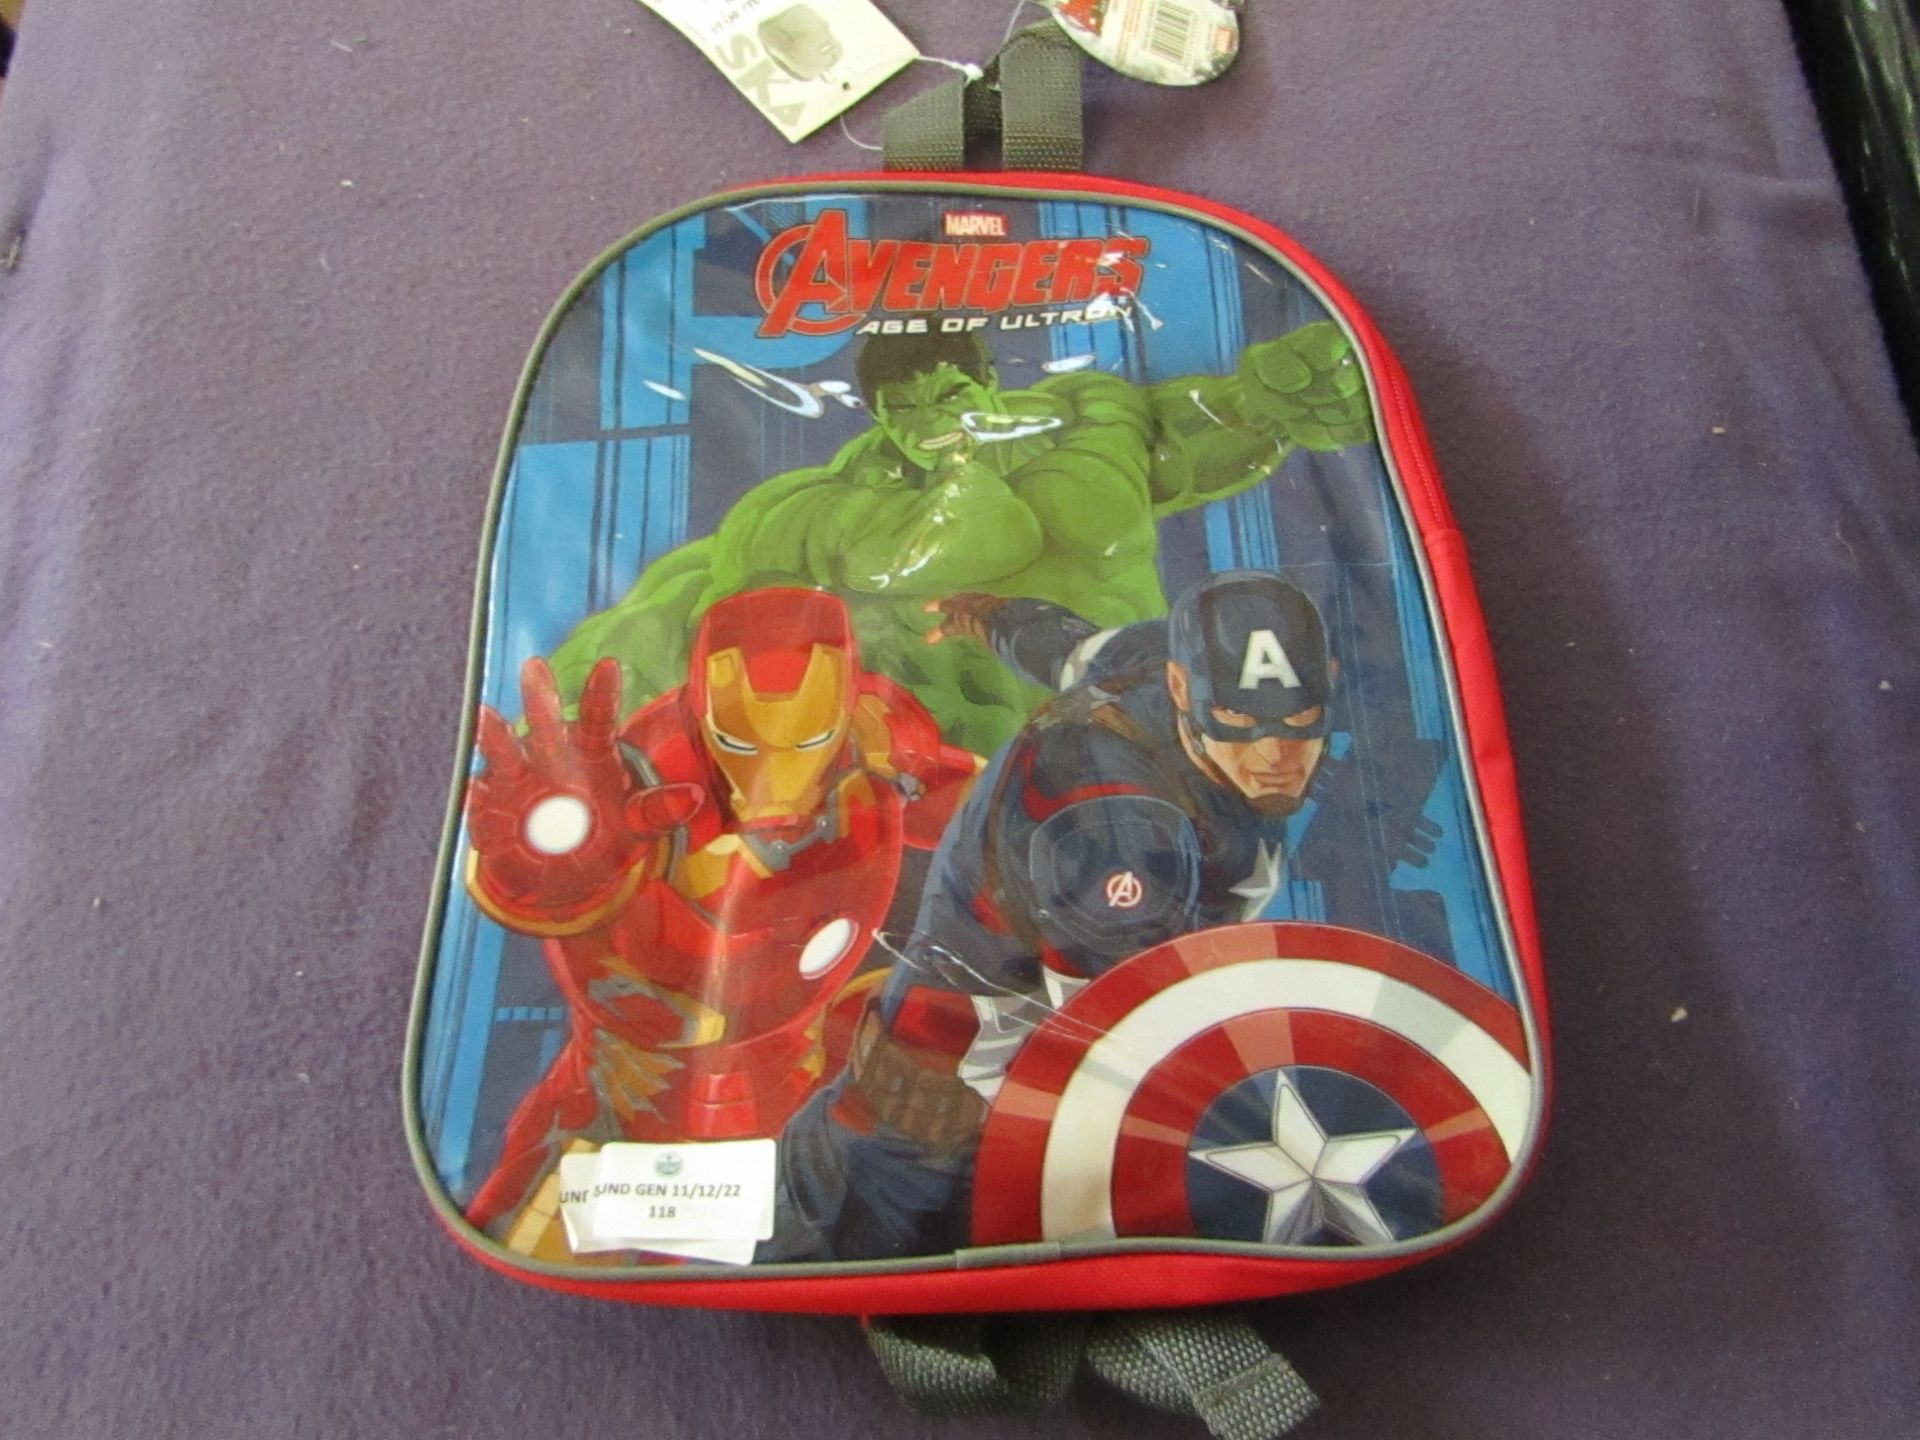 Marvel Avengers - Age of Ultron Backpack - No Packaging, Original Tags.